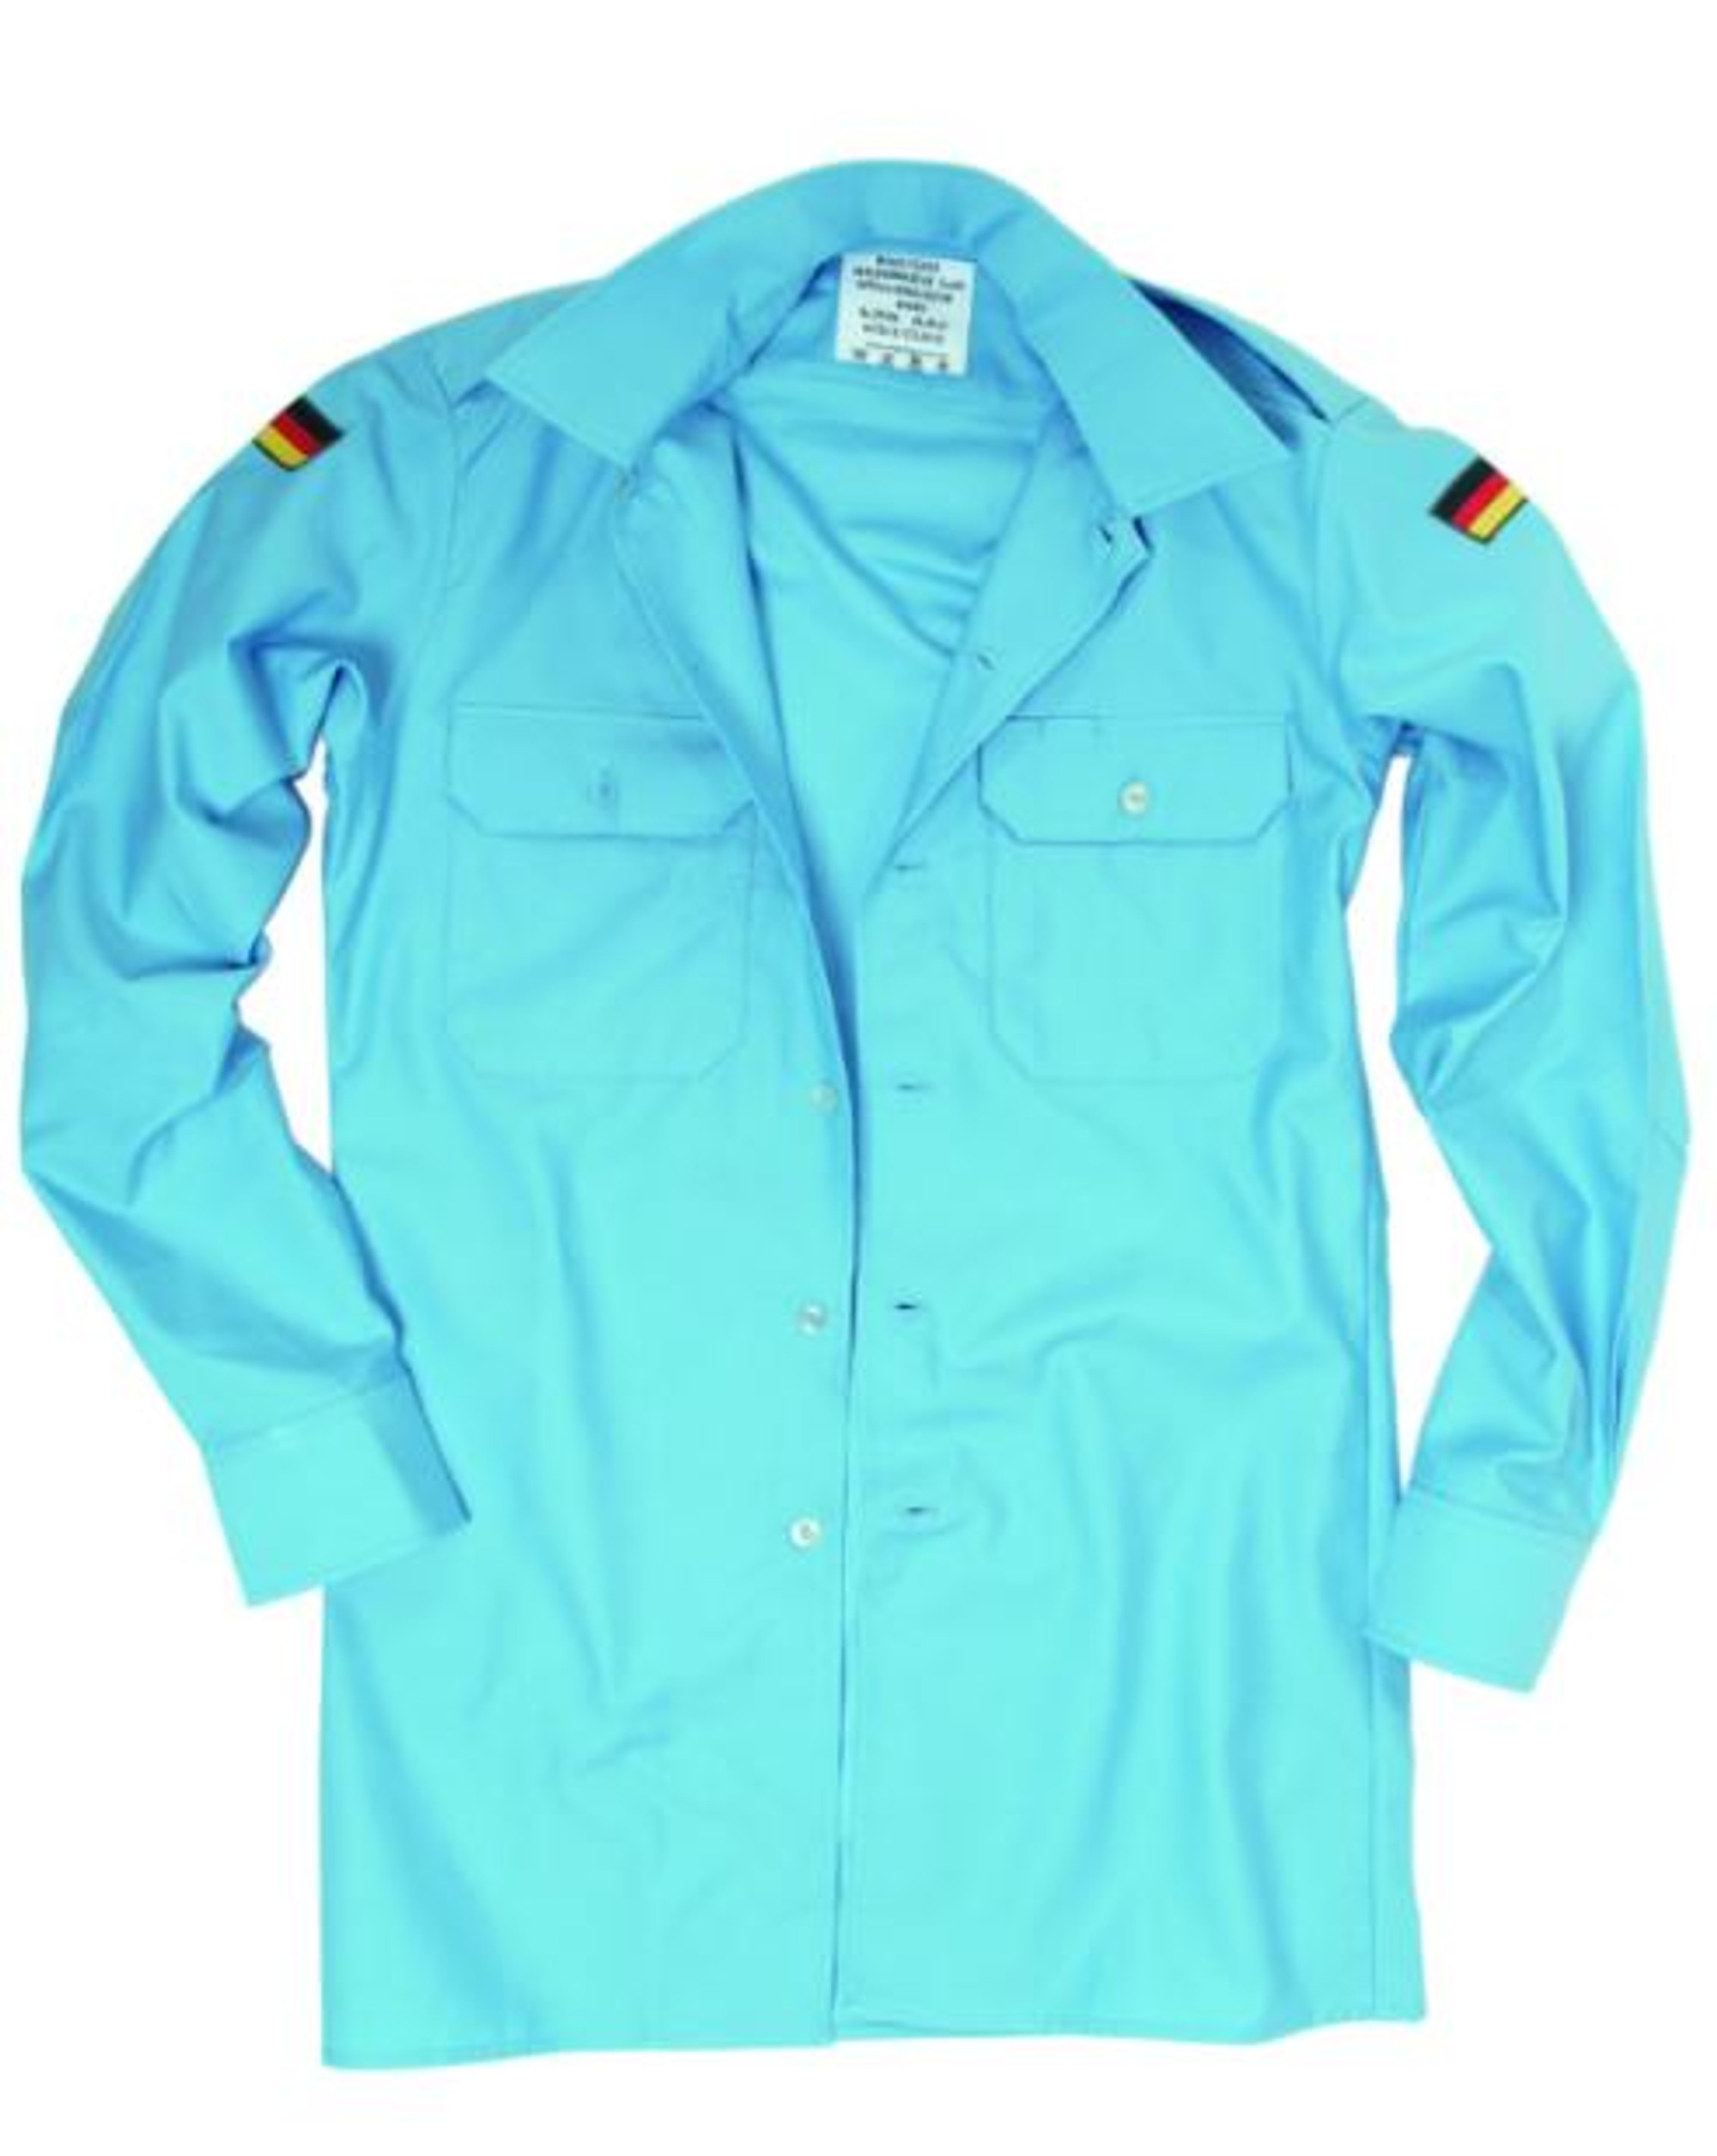 German Armed Forces Blue Navy Field Shirt